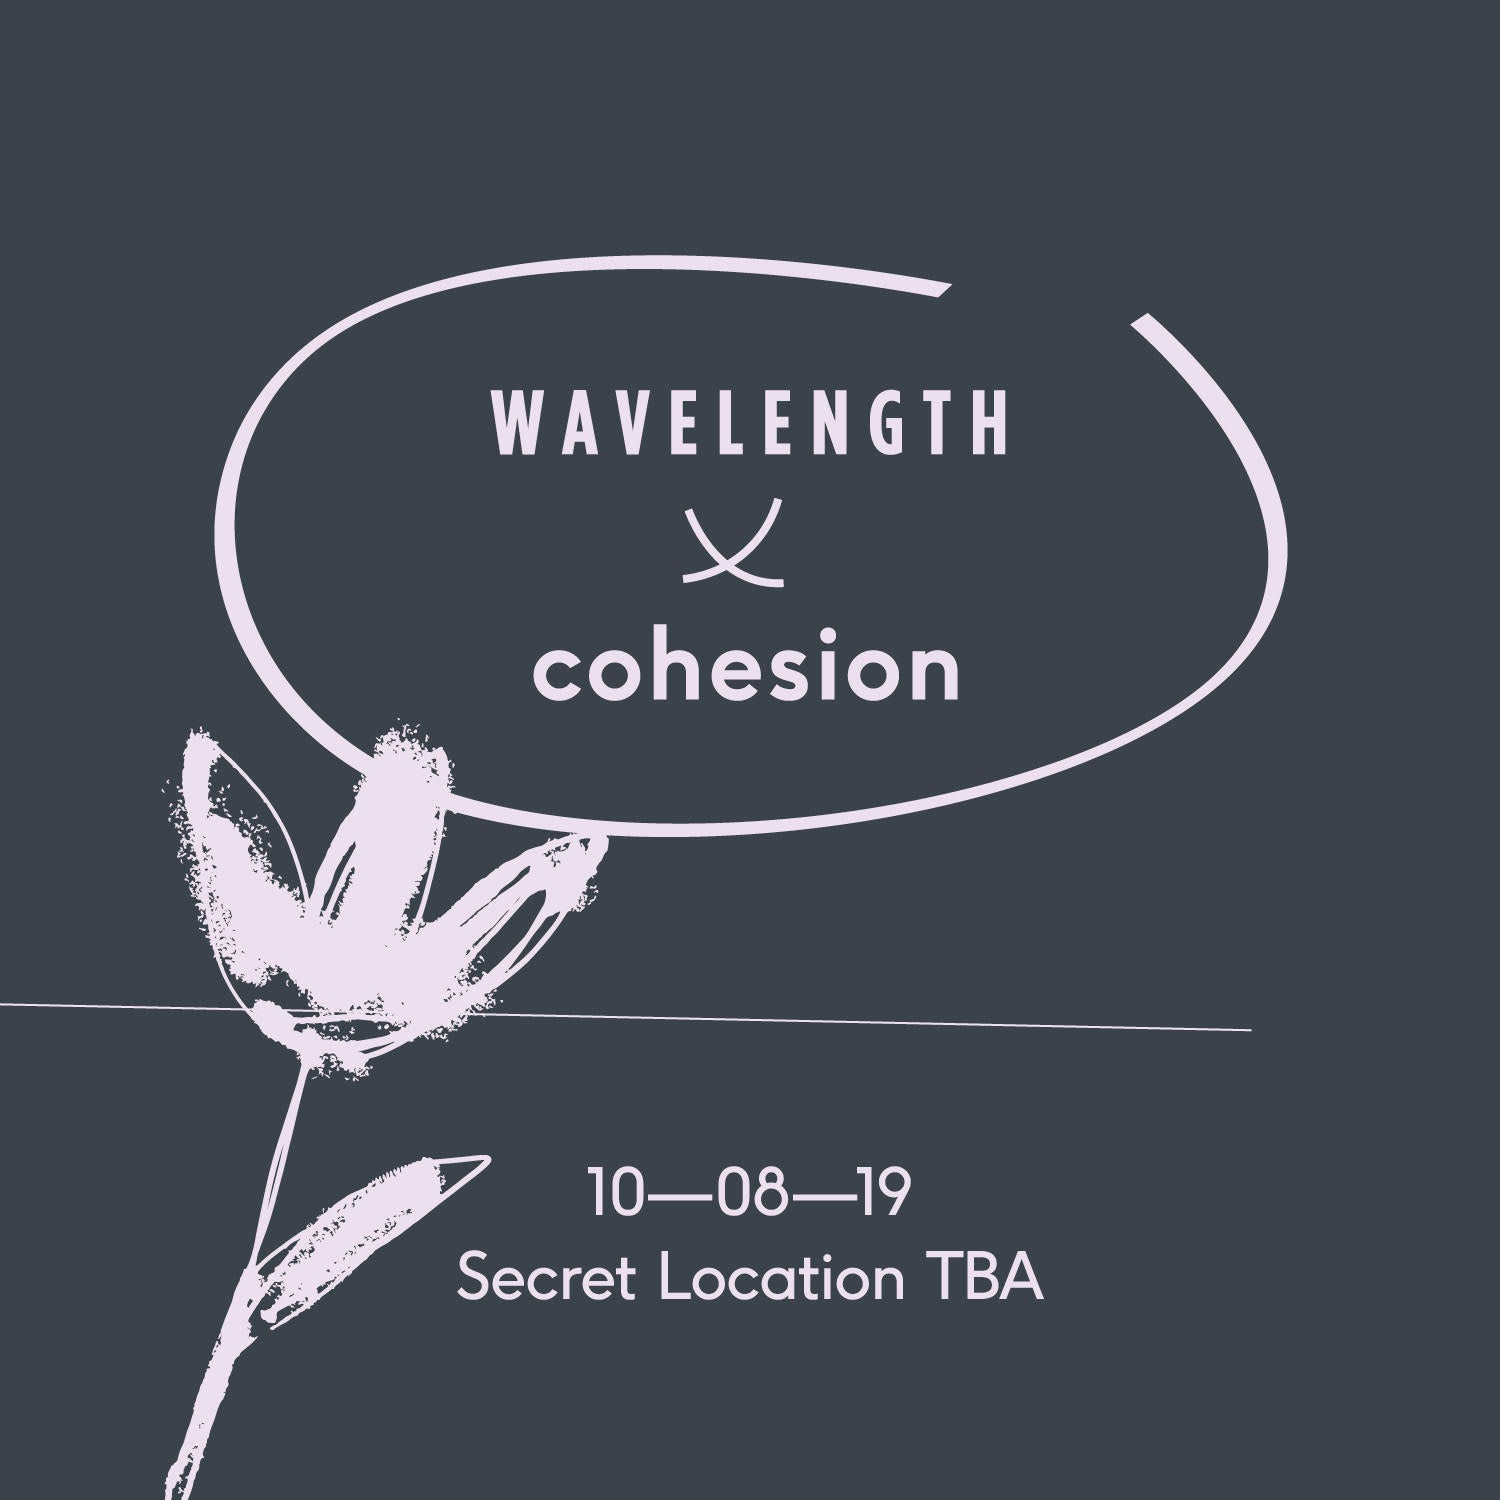 Wavelength X Cohesion: Loose Ends